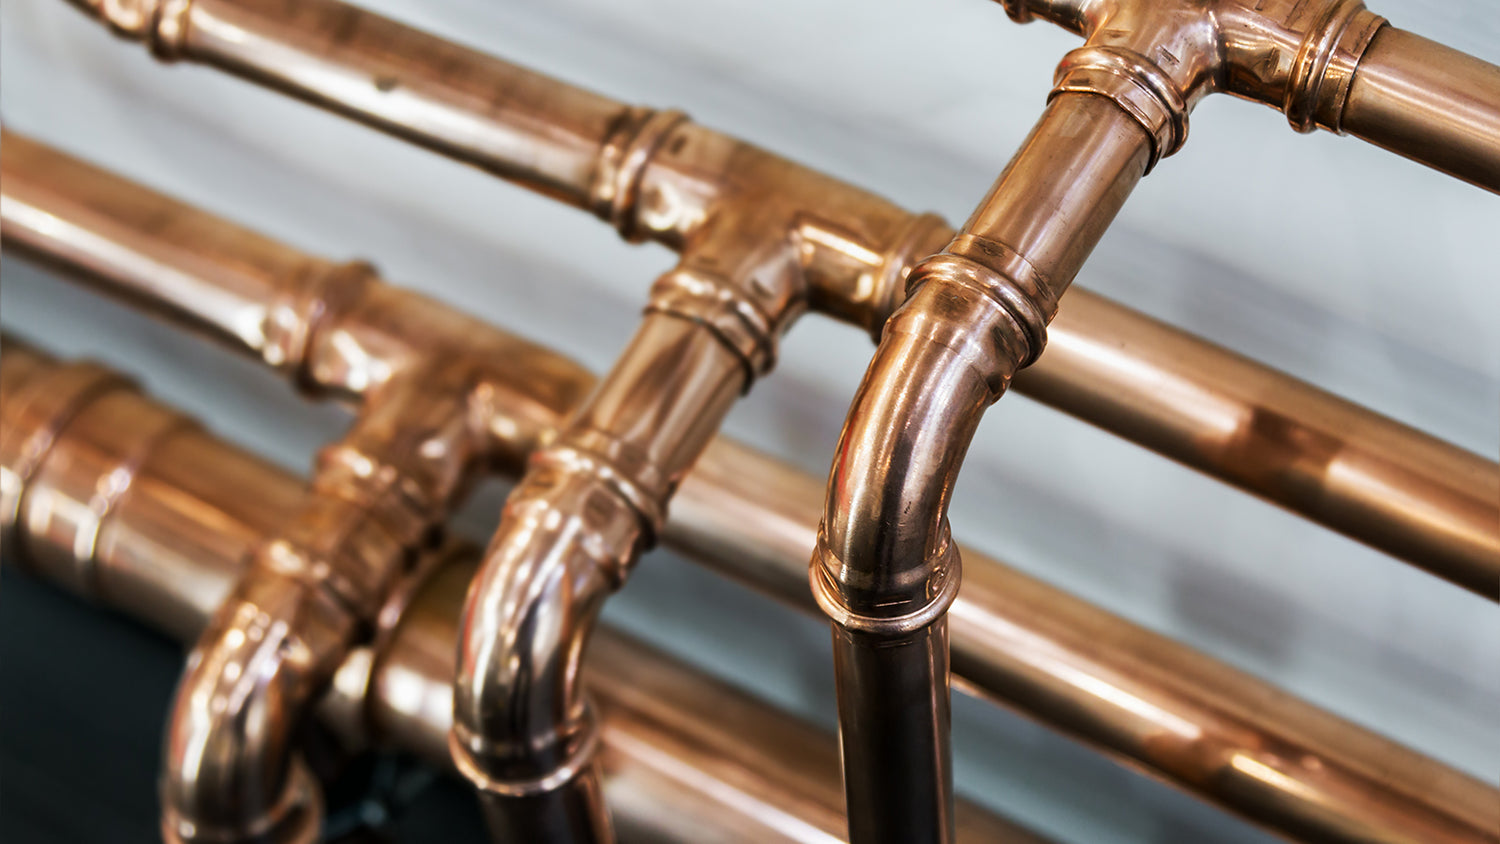 How to Prevent Copper Pipe Corrosion in Your Home